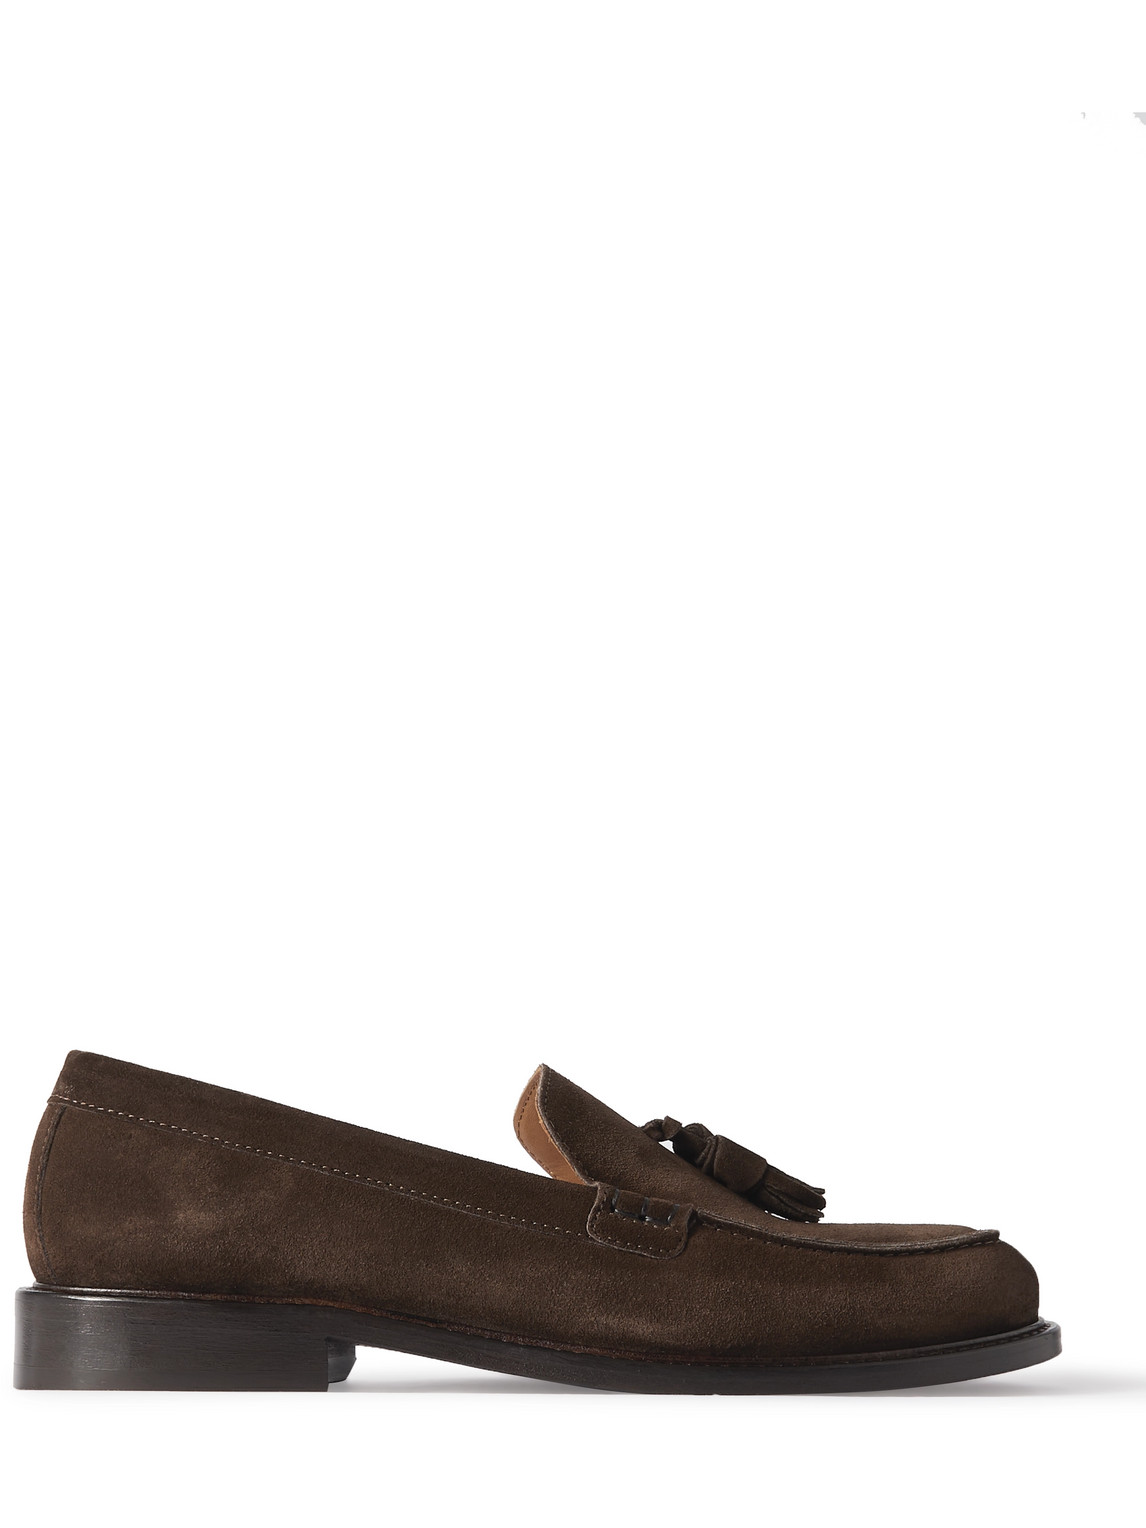 Mr P Scott Suede Penny Loafers In Brown